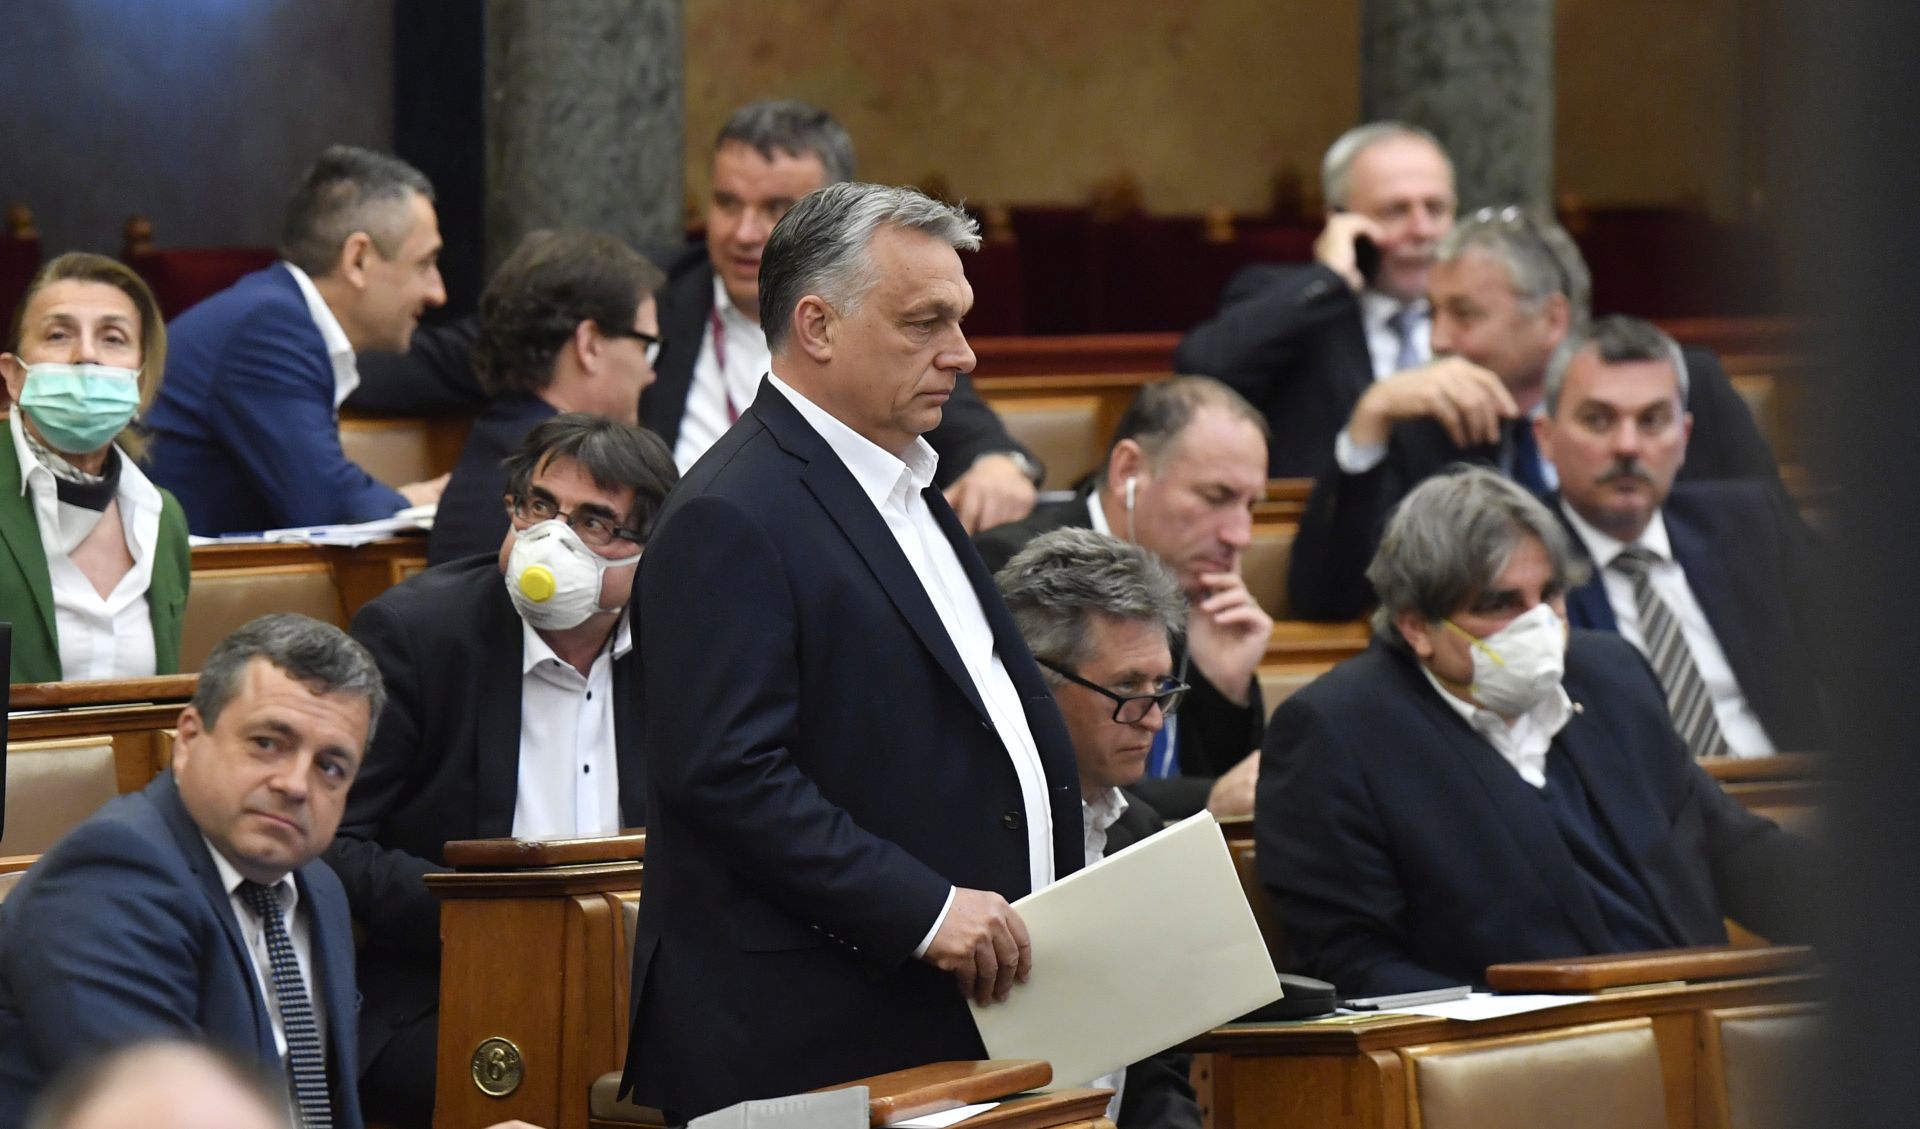 epaselect epa08332120 Hungarian Prime Minister Viktor Orban (C) arrives for the plenary session of the Parliament in Budapest, Hungary, 30 March 2020. Reports state MPs approved legislation that extends a state of emergency and gives the government extraordinary powers due to the ongoing pandemic of the Covid-19 disease caused by the SARS-CoV-2 coronavirus.  EPA/Zoltan Mathe HUNGARY OUT